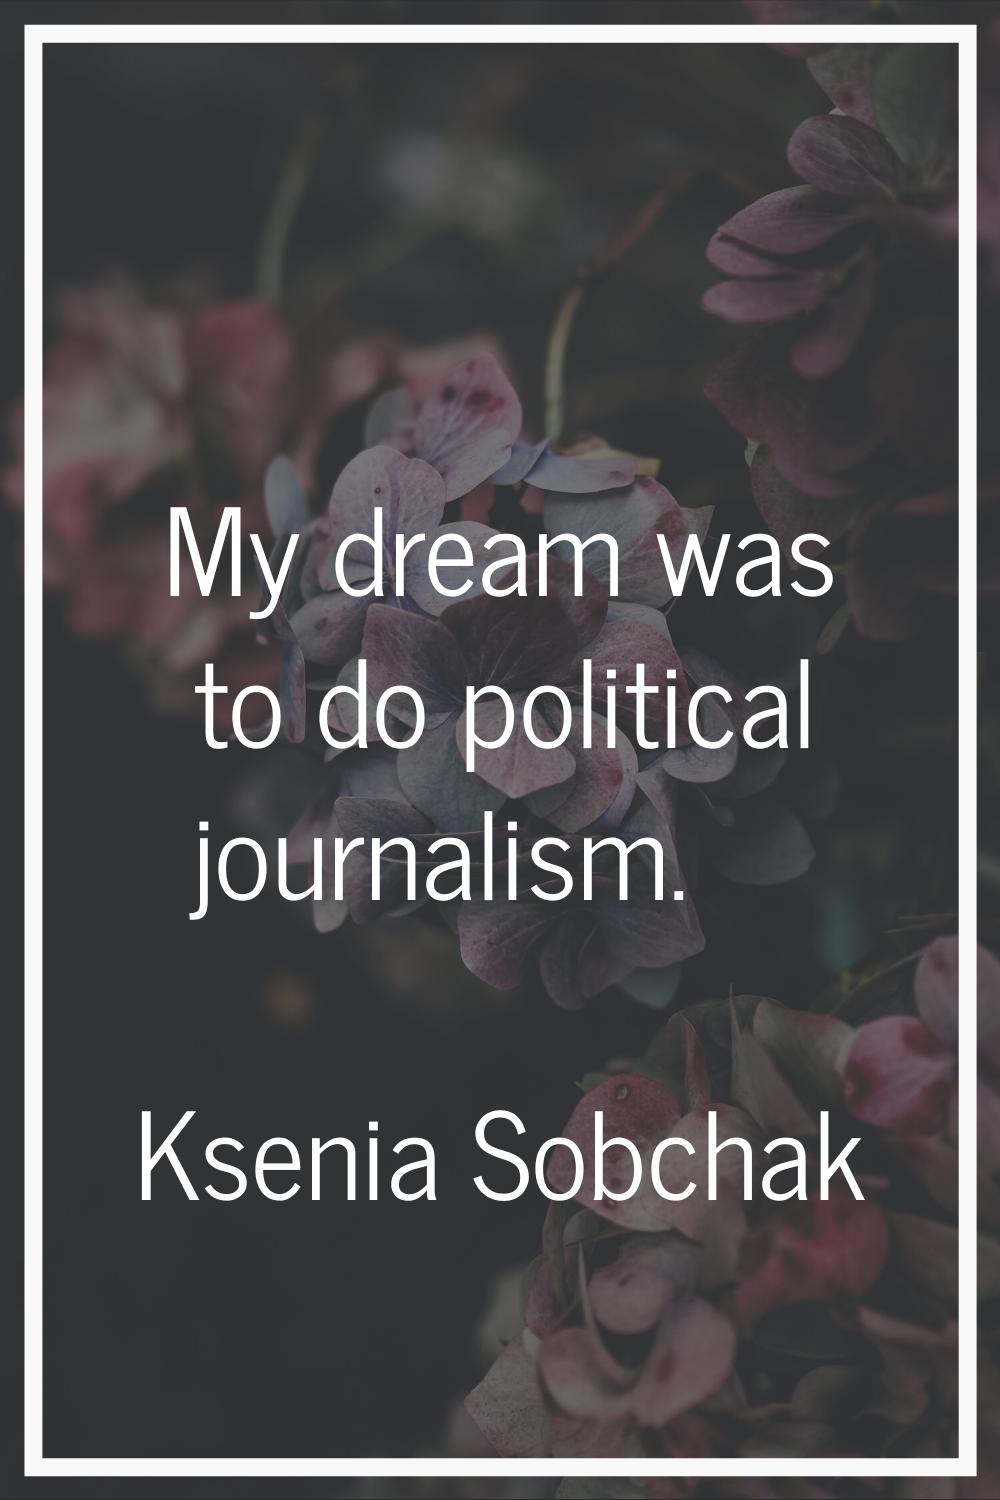 My dream was to do political journalism.